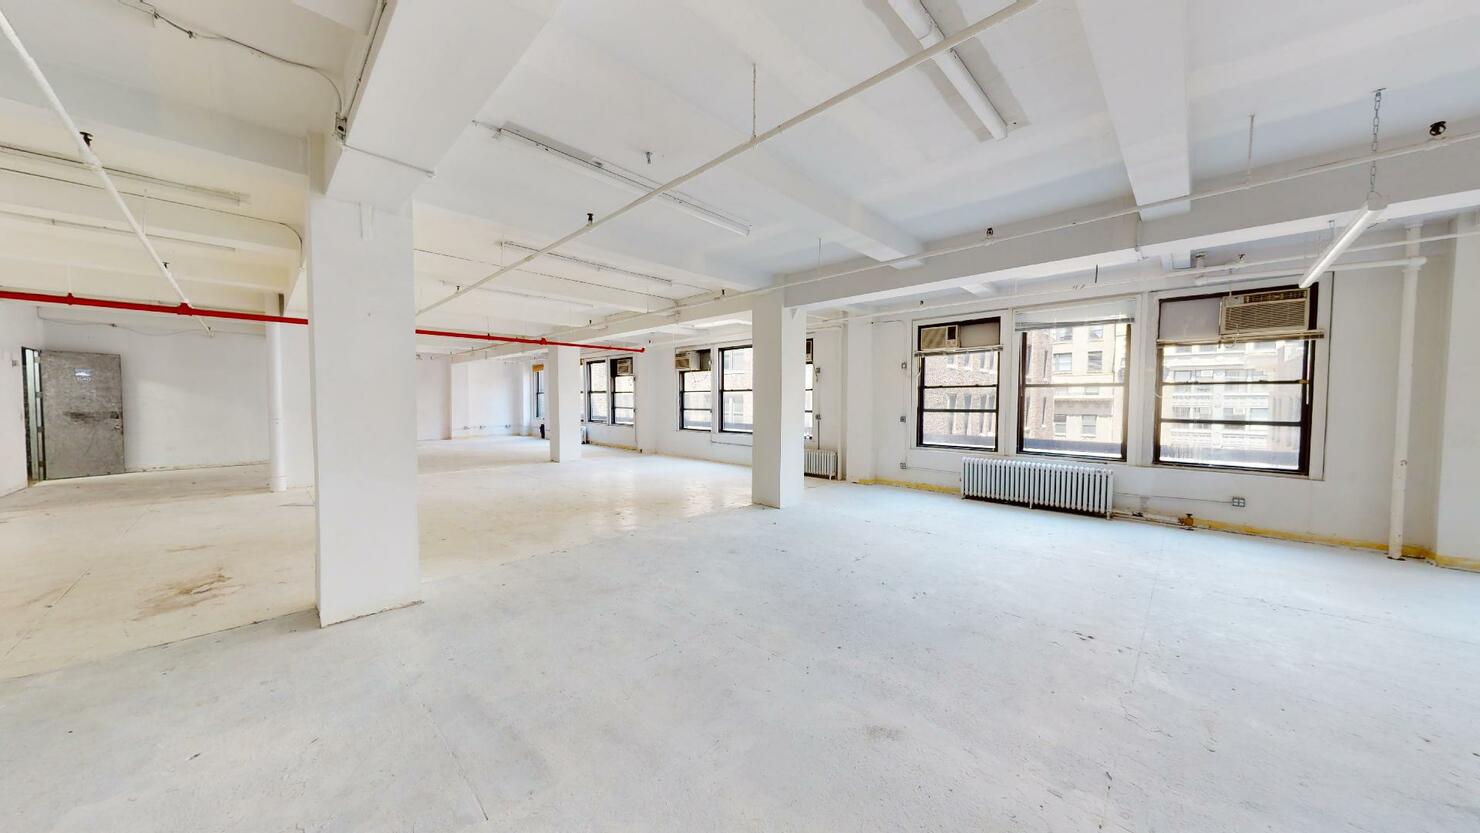 255 West 36th Street Office Space, 11th Floor - Large Windows